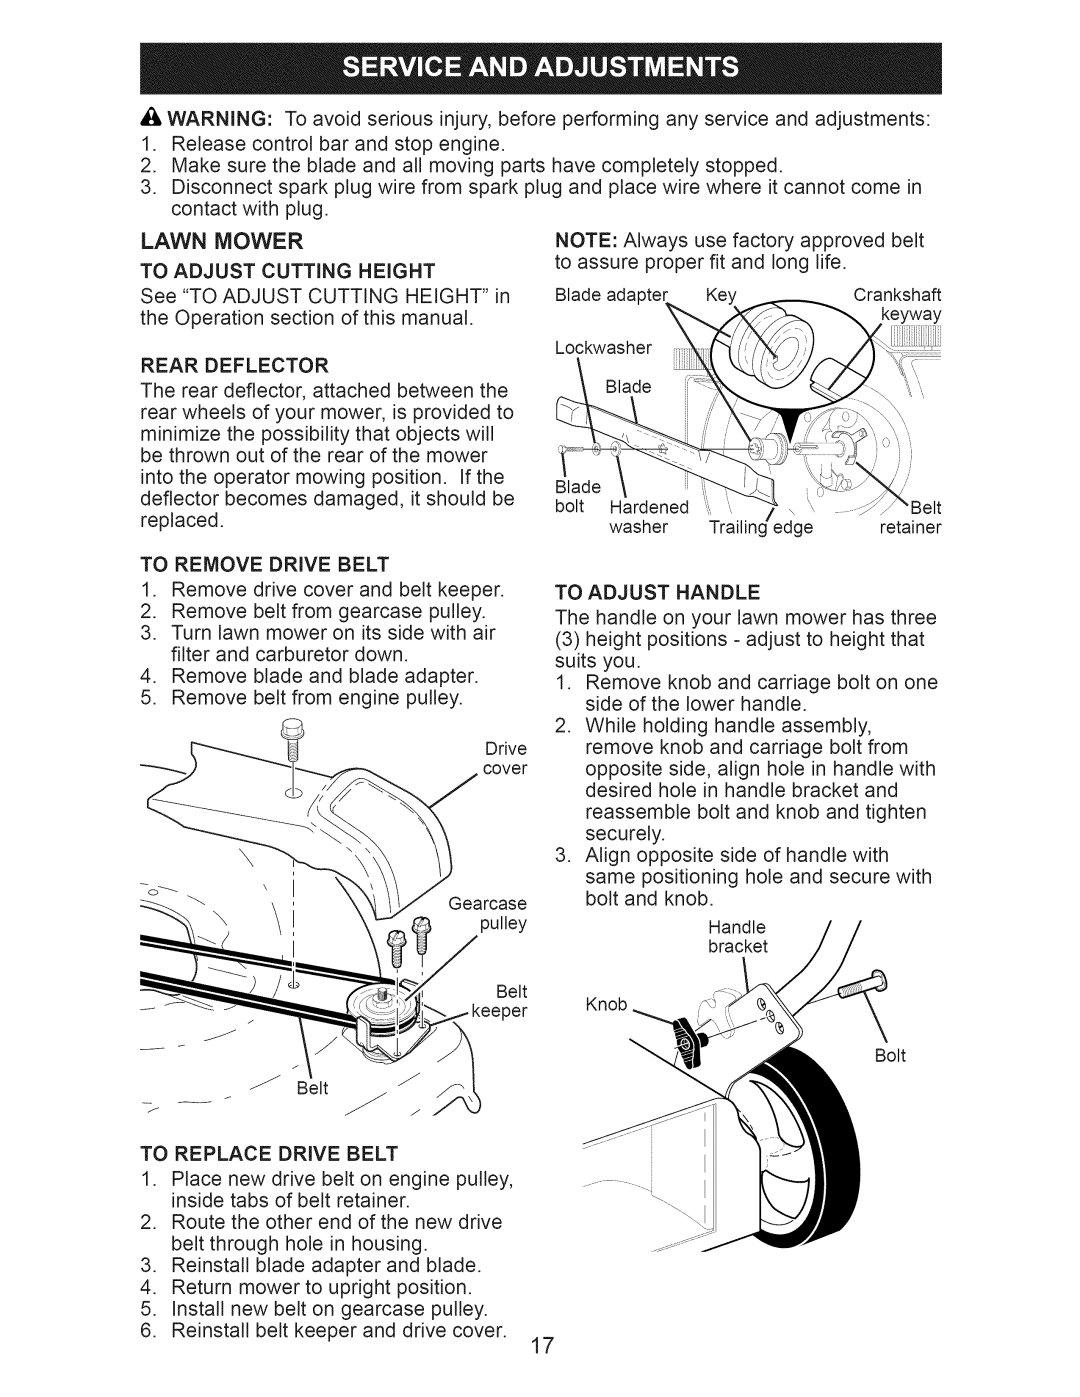 Craftsman 917.374061 owner manual Lawn Mower To Adjust Cutting Height 